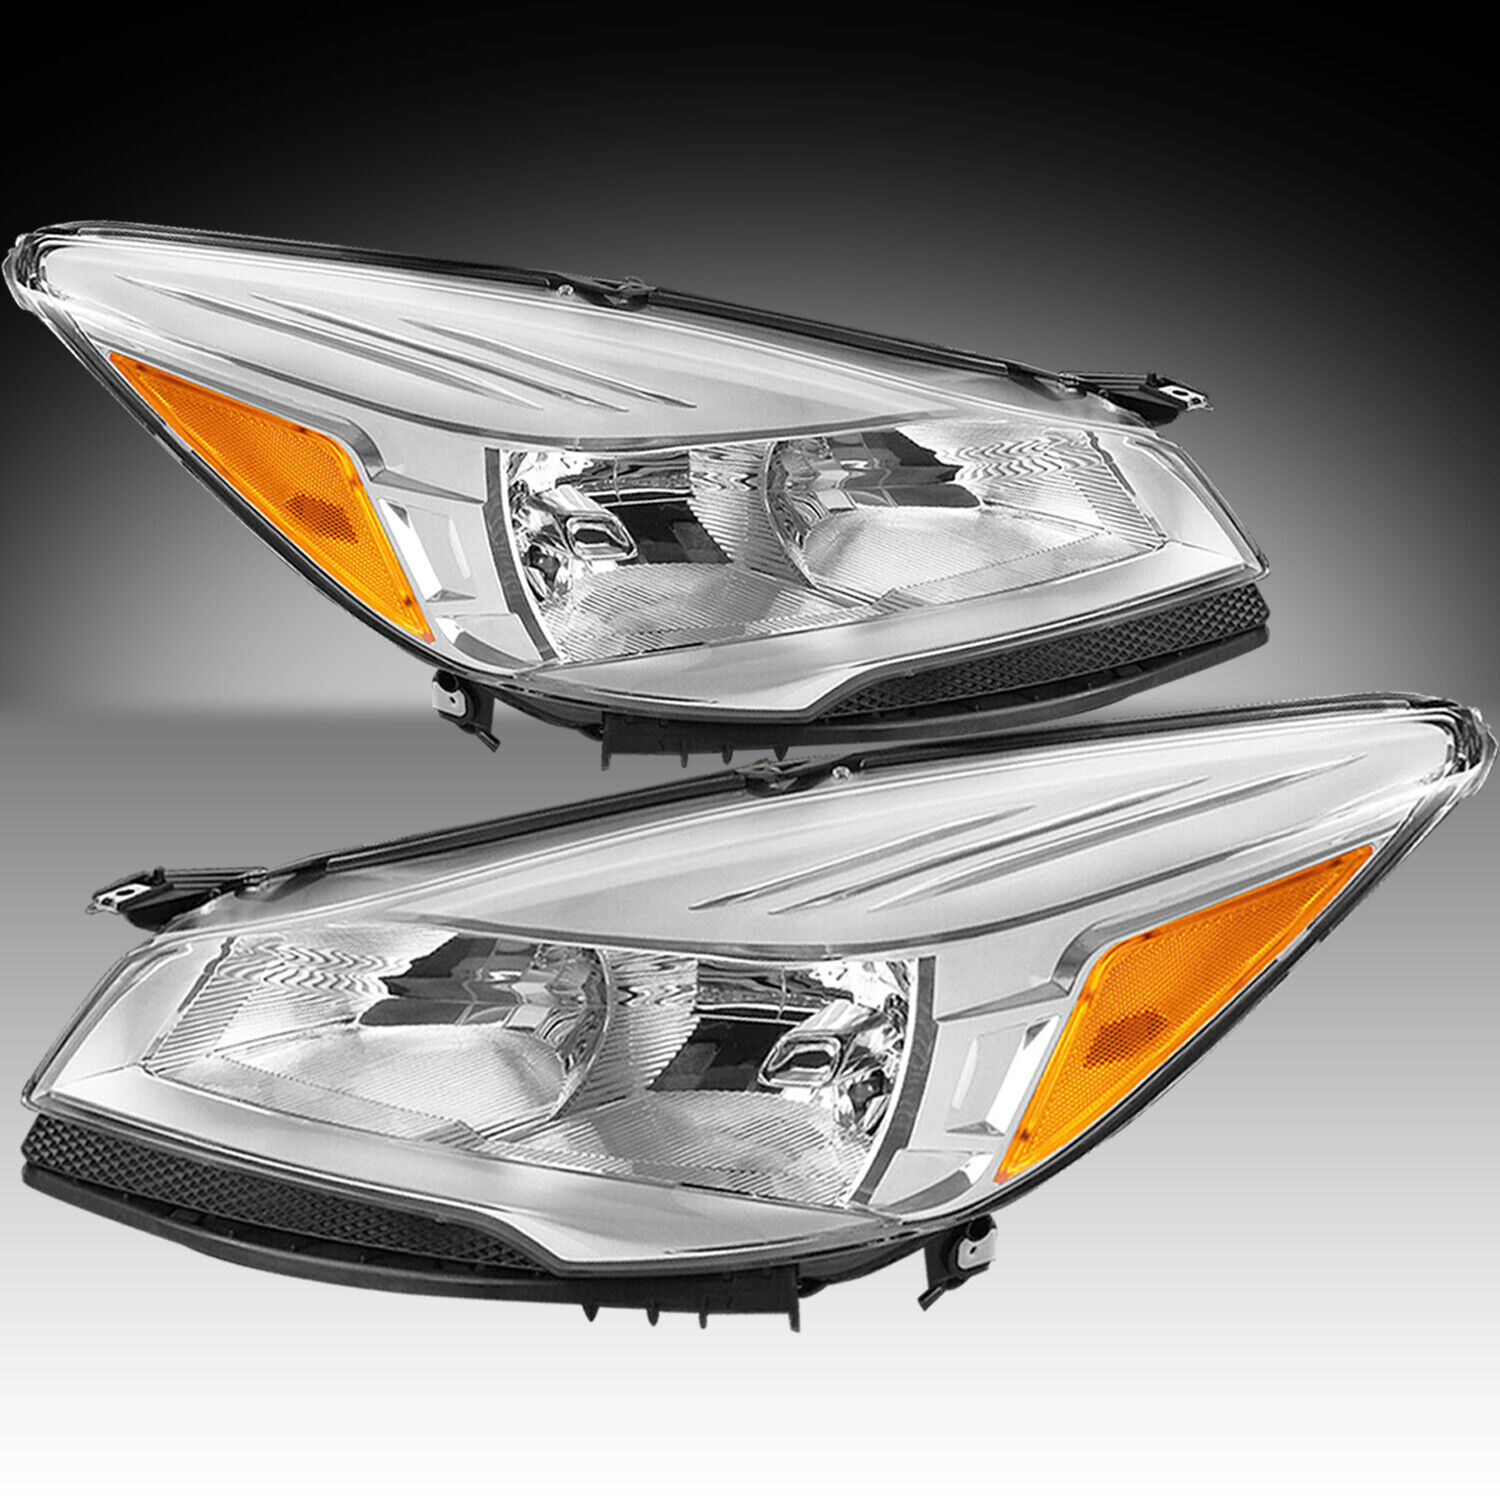 [Halogen Type] For 2013 2014 2015 2016 Ford Escape Chrome Headlights Headlamps